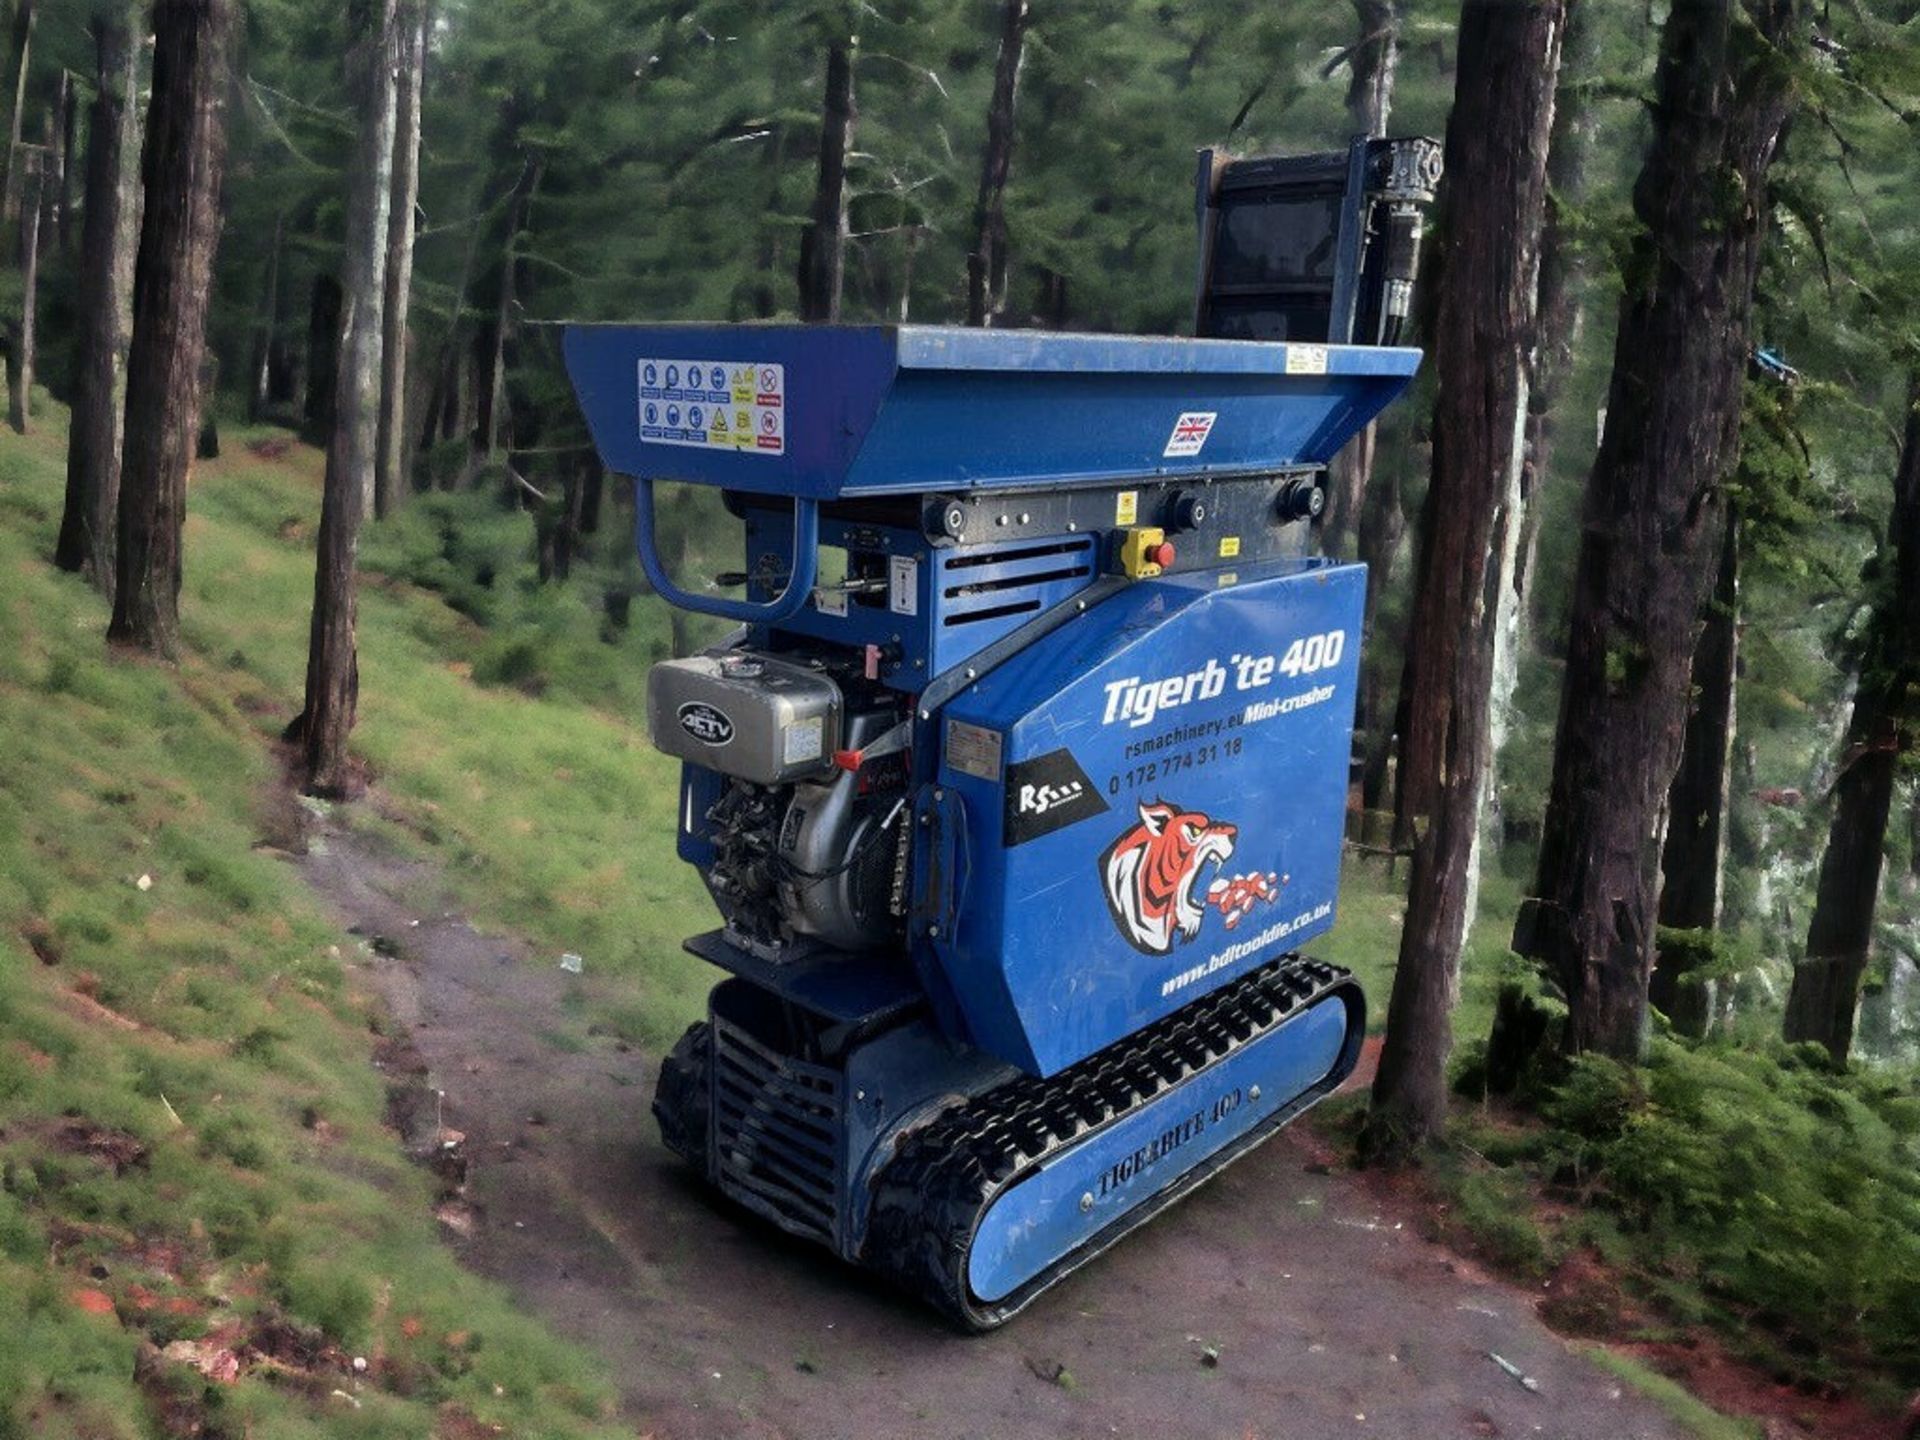 2020 TIGERBITE 400 TRACKED MINI CRUSHER - EFFICIENT, COMPACT, AND READY TO WORK - Bild 4 aus 7